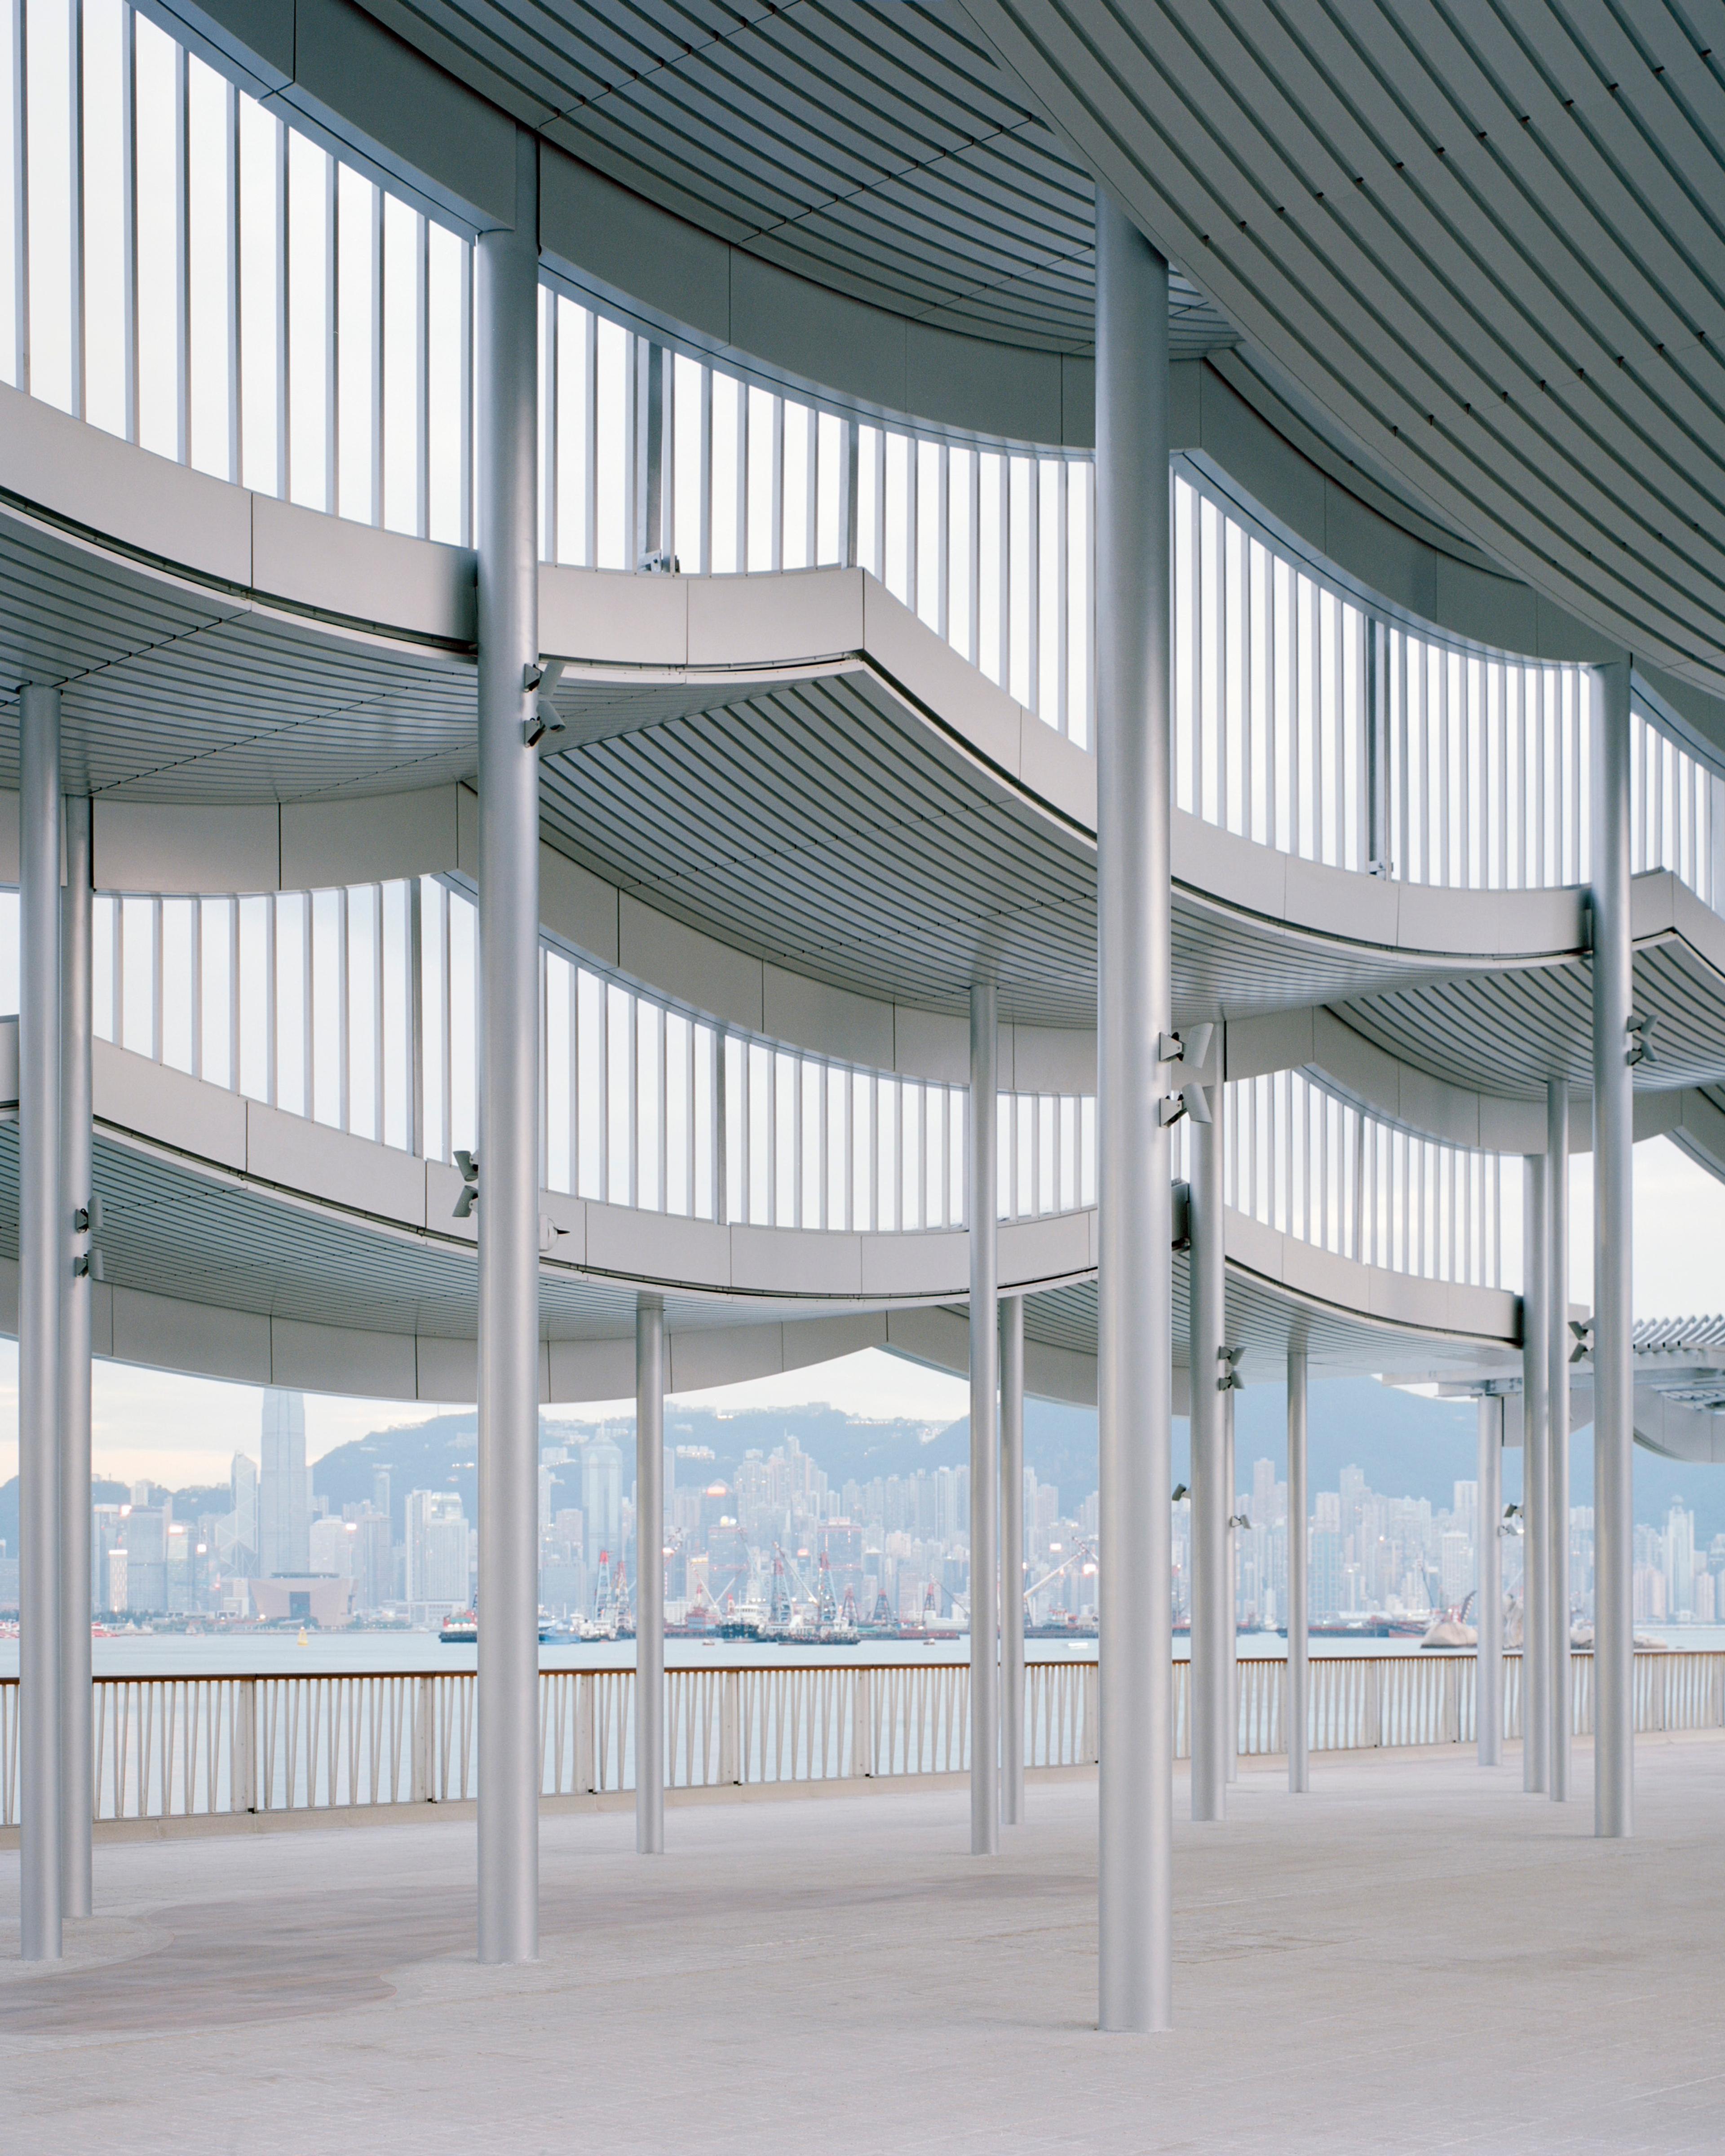 Interior of silver undulating pier canopy and Hong Kong skyline in background